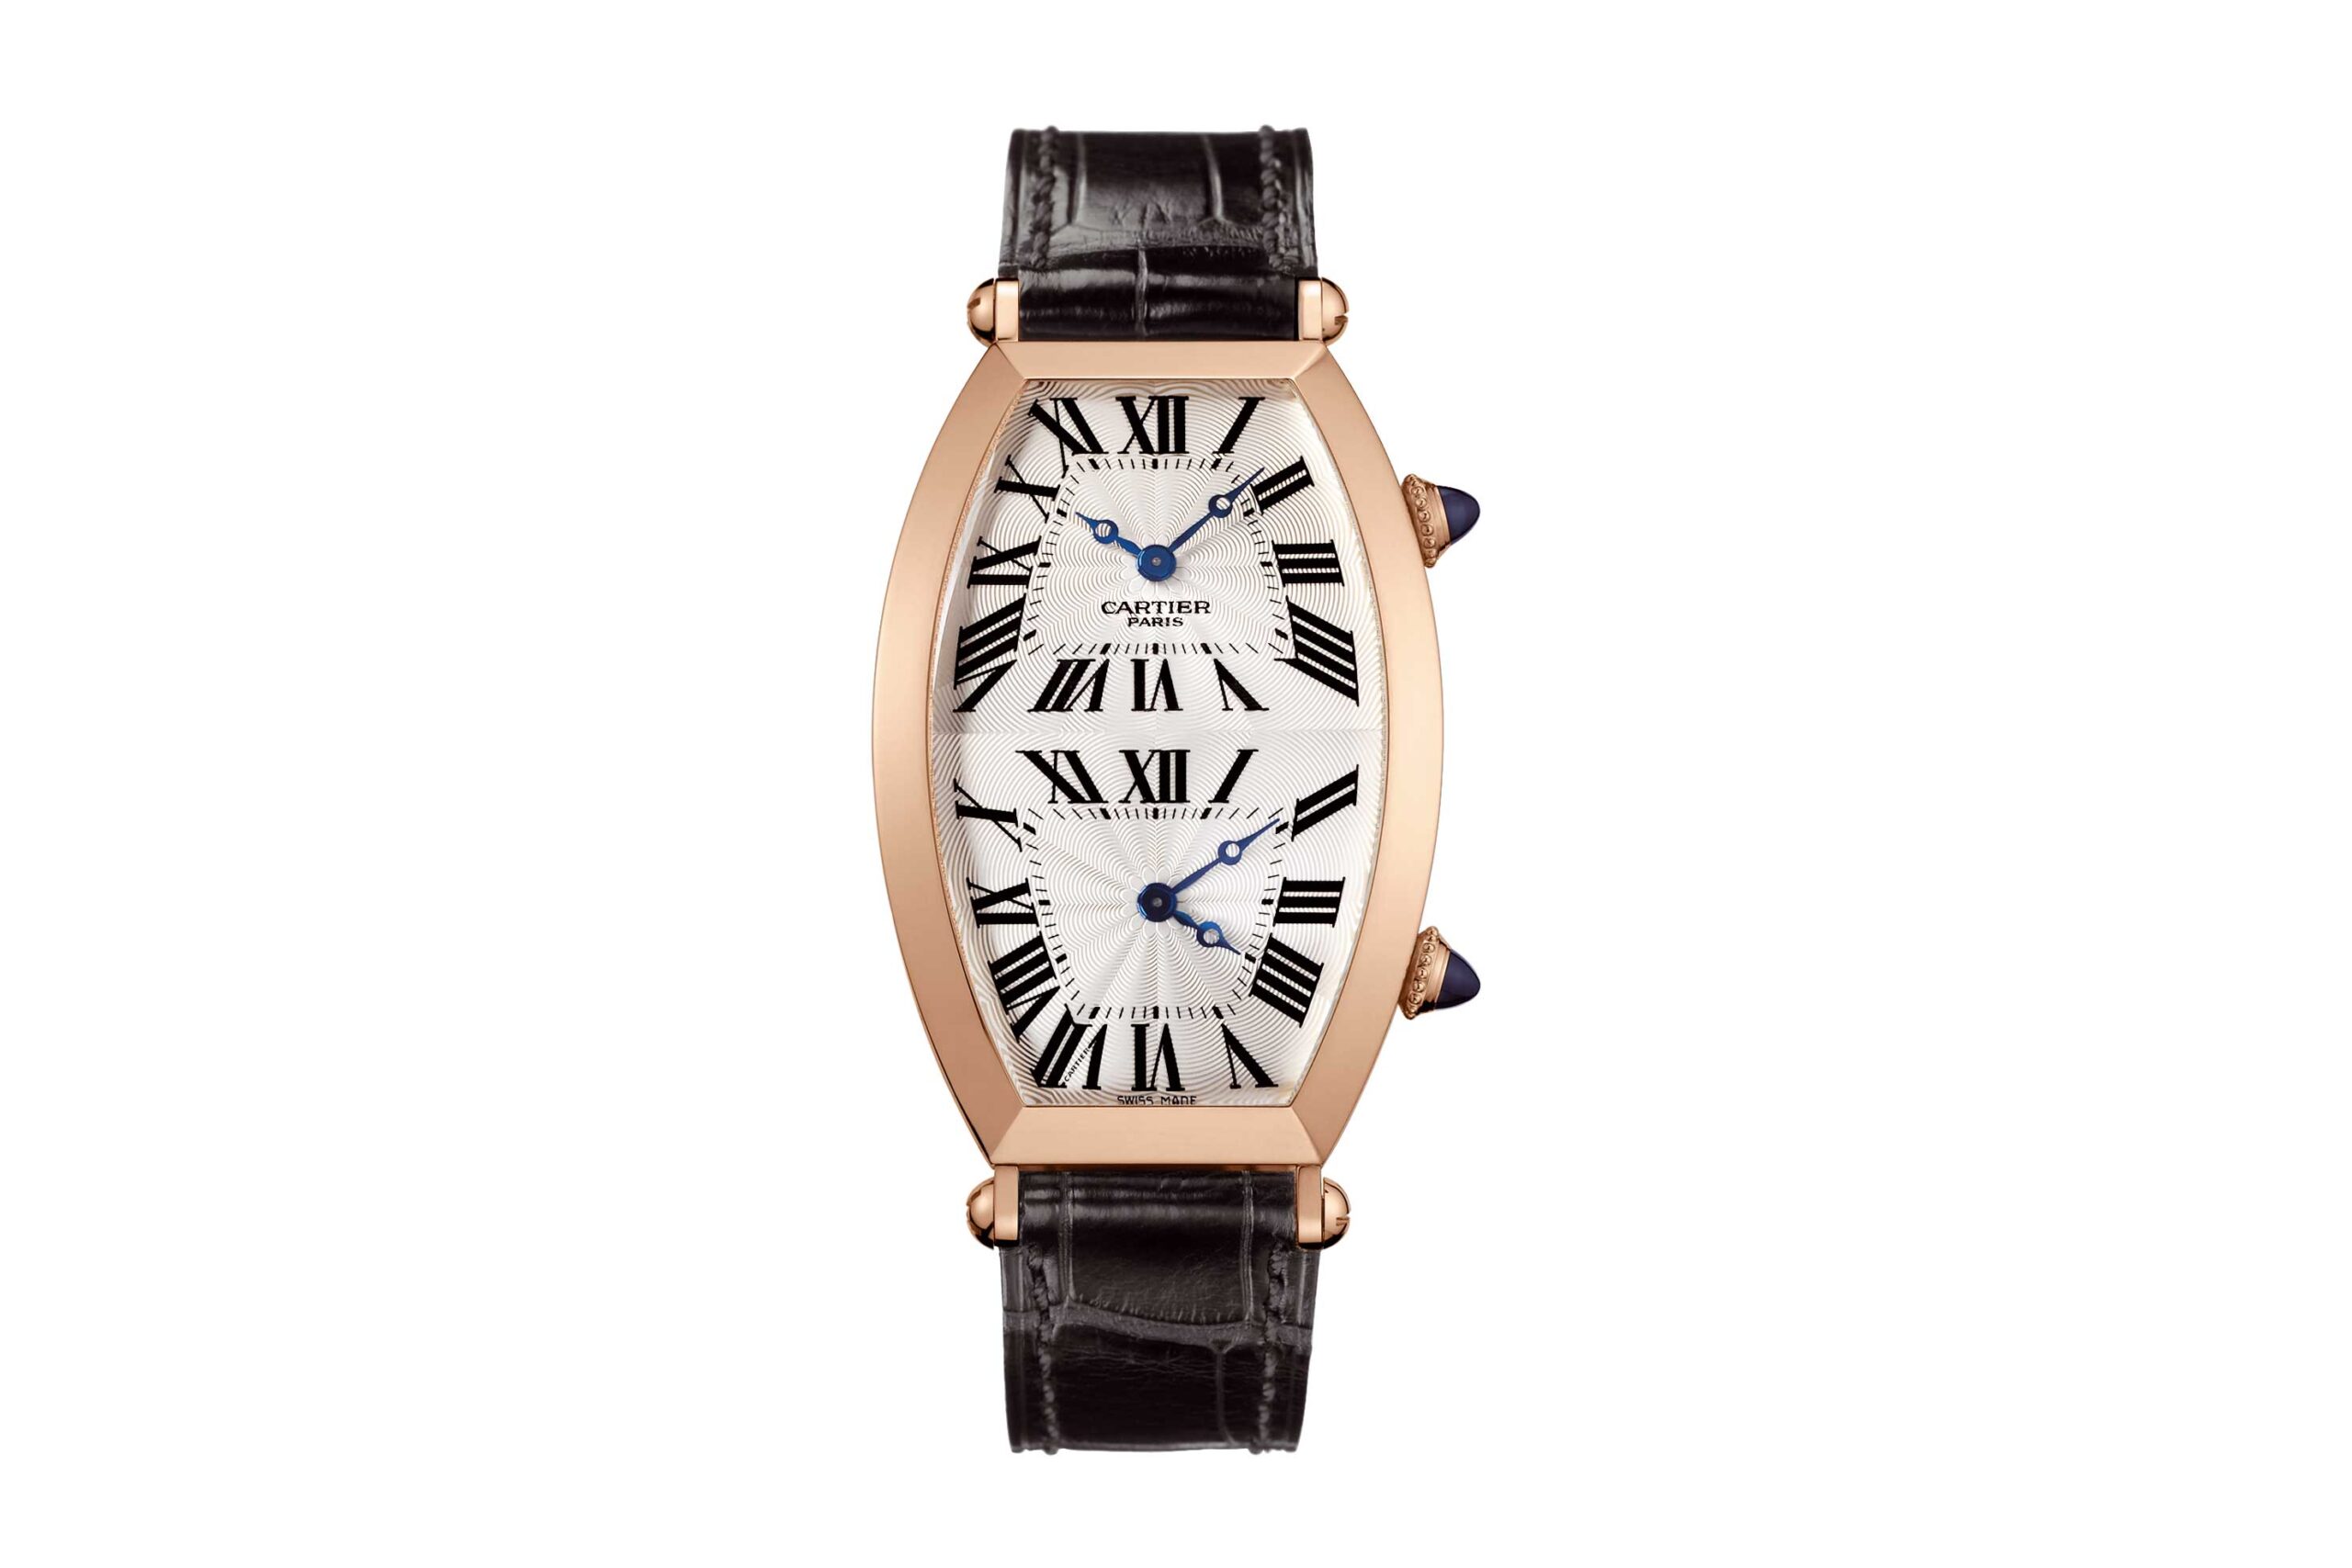 A 2005 example of a Collection Privée Cartier Paris (CPCP): Tonneau Dual Time Zone watch; 15.33mm by 2.9mm, powered by the 9770 MC movment, which features two tiny mechanical movements that can be independently set by the individual corresponding crowns